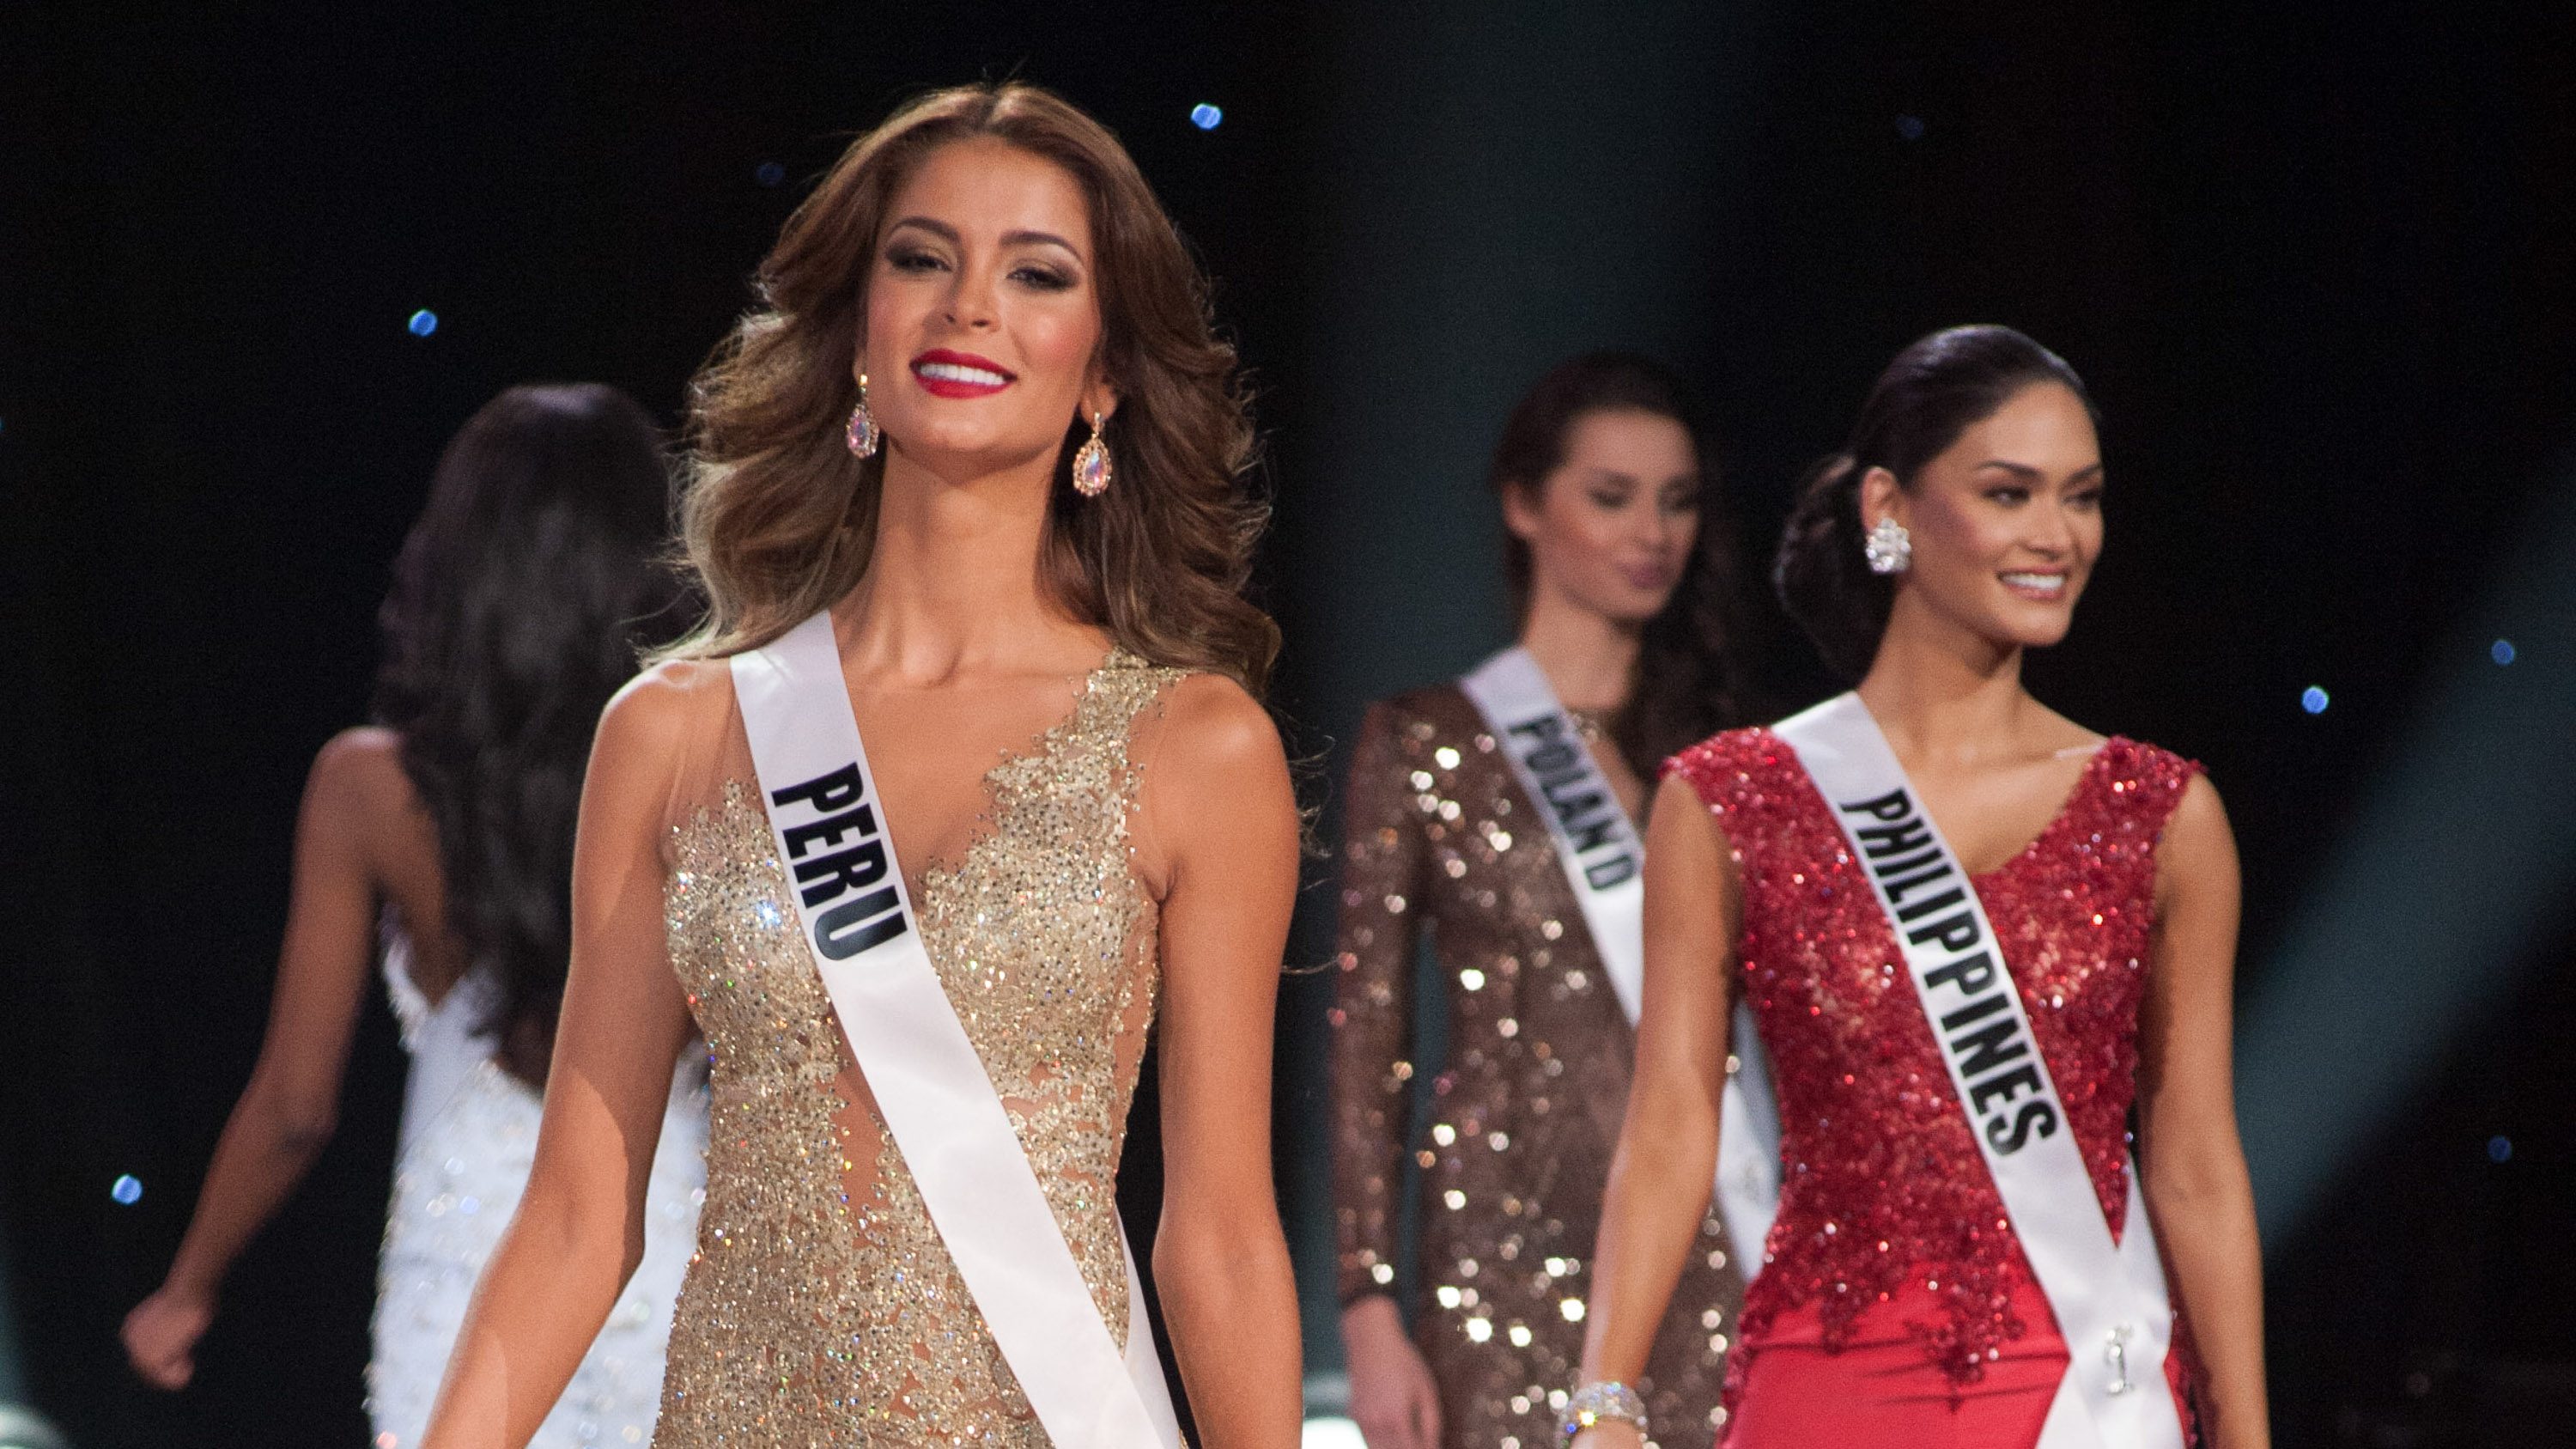 PRELIMINARIES 2015. Miss Peru 2015 Laura Spoya and Miss Philippines Pia Wurtzbach compete on stage in their evening gowns during the 2015 Miss Universe Preliminary Show at Planet Hollywood Resort & Casino on December 16, 2015. The Miss Universe semifinalists are chosen during the pageant's preliminary round. File photo from HO/The Miss Universe Organization 